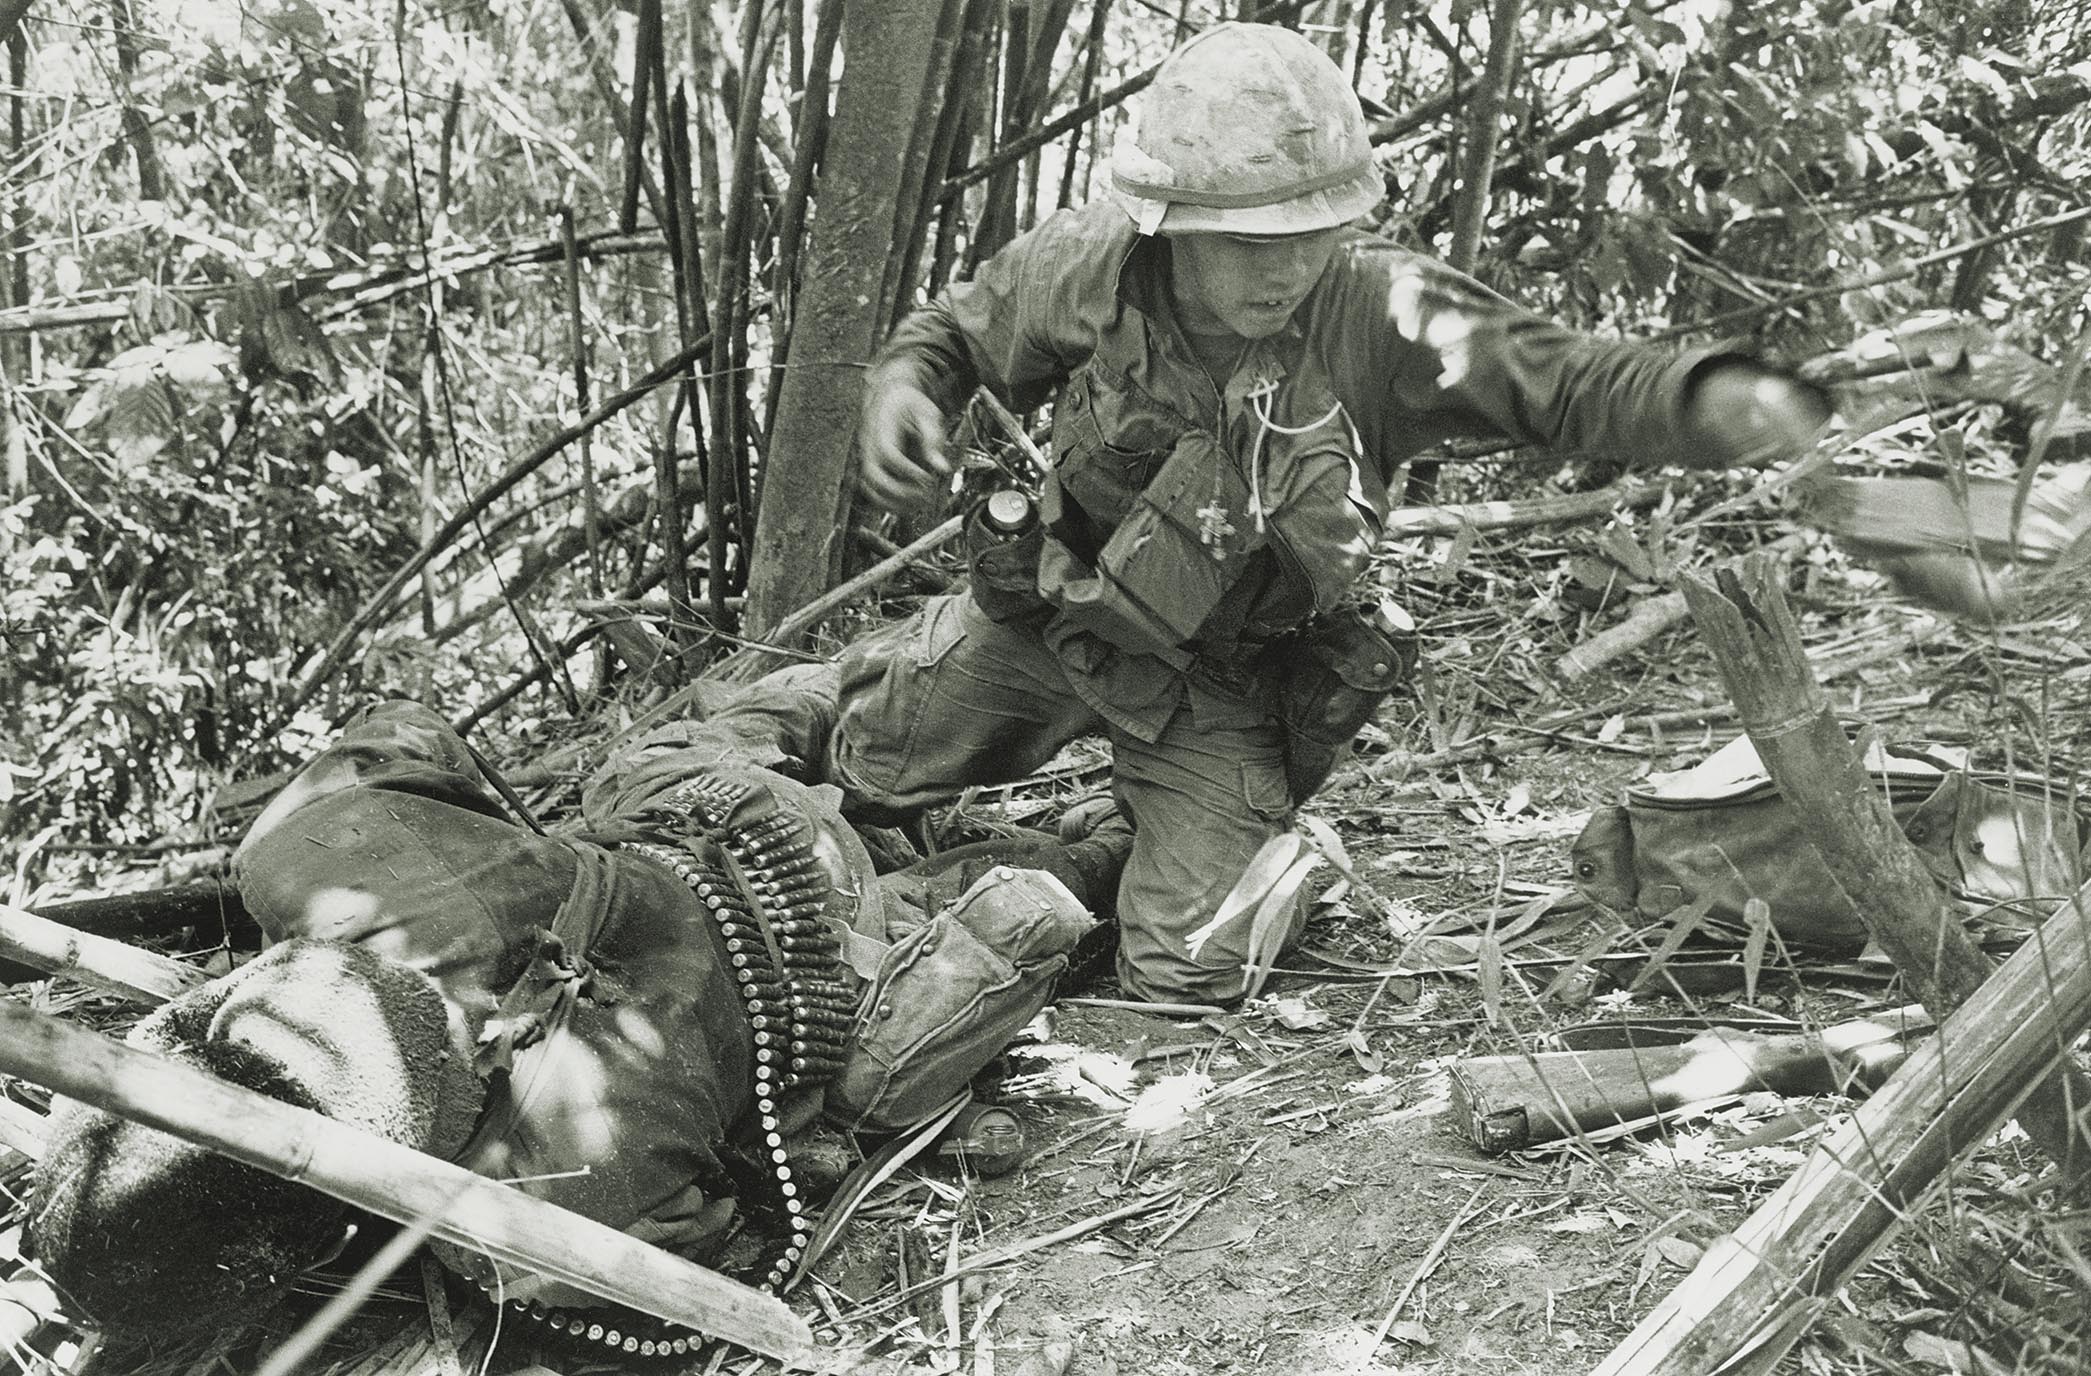 As fighting raged at Tam Ky, a rocket exploded directly behind a 101st Airborne soldier, wounding him during an assault on Hamburger Hill, May 20, 1969. / Getty Images